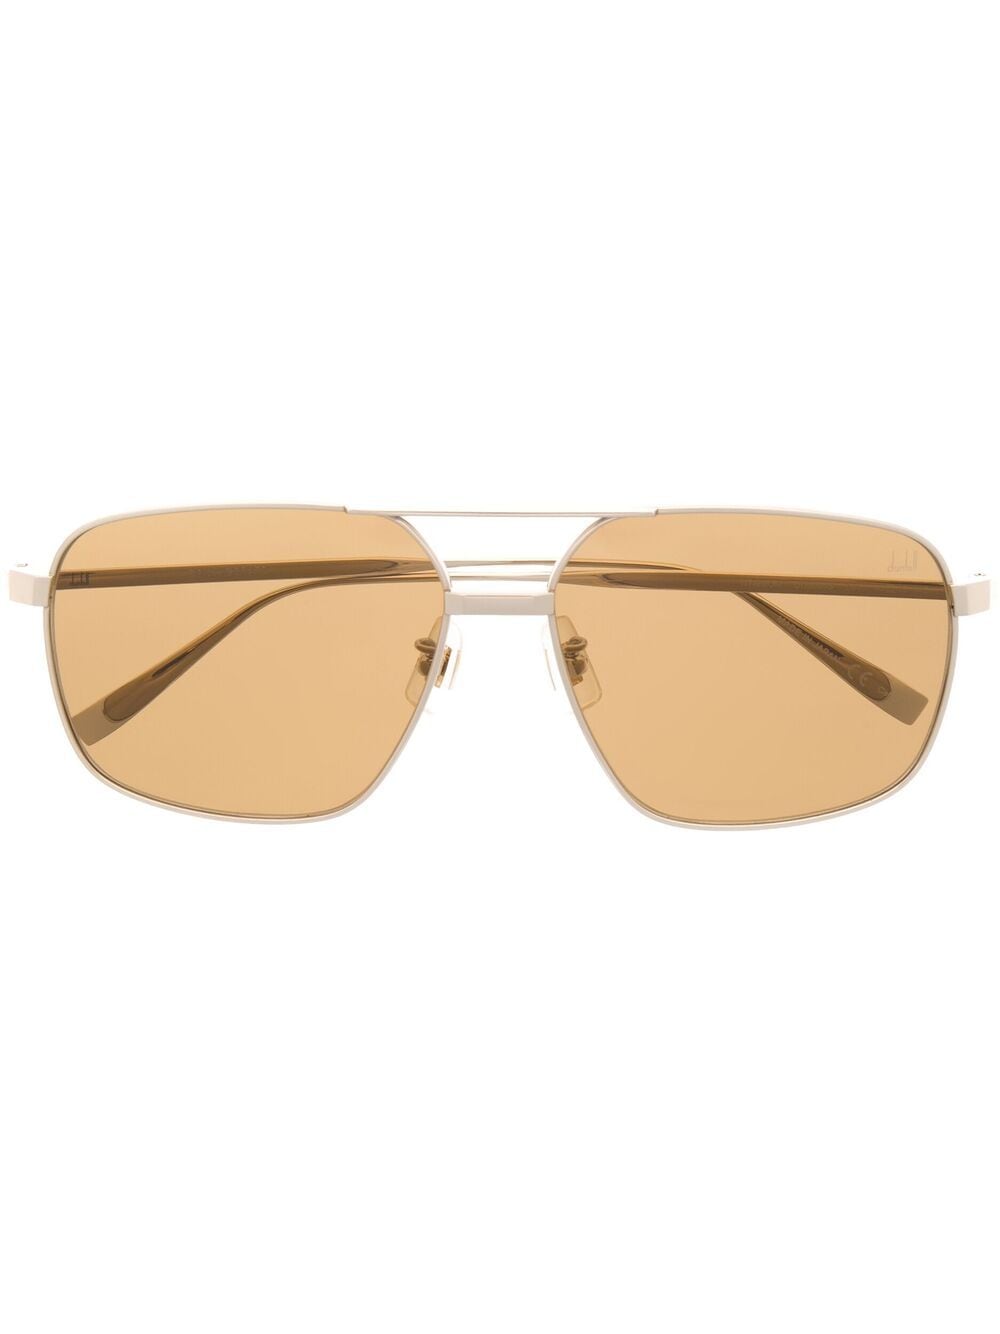 Dunhill Pilot Frame Sunglasses In Gold